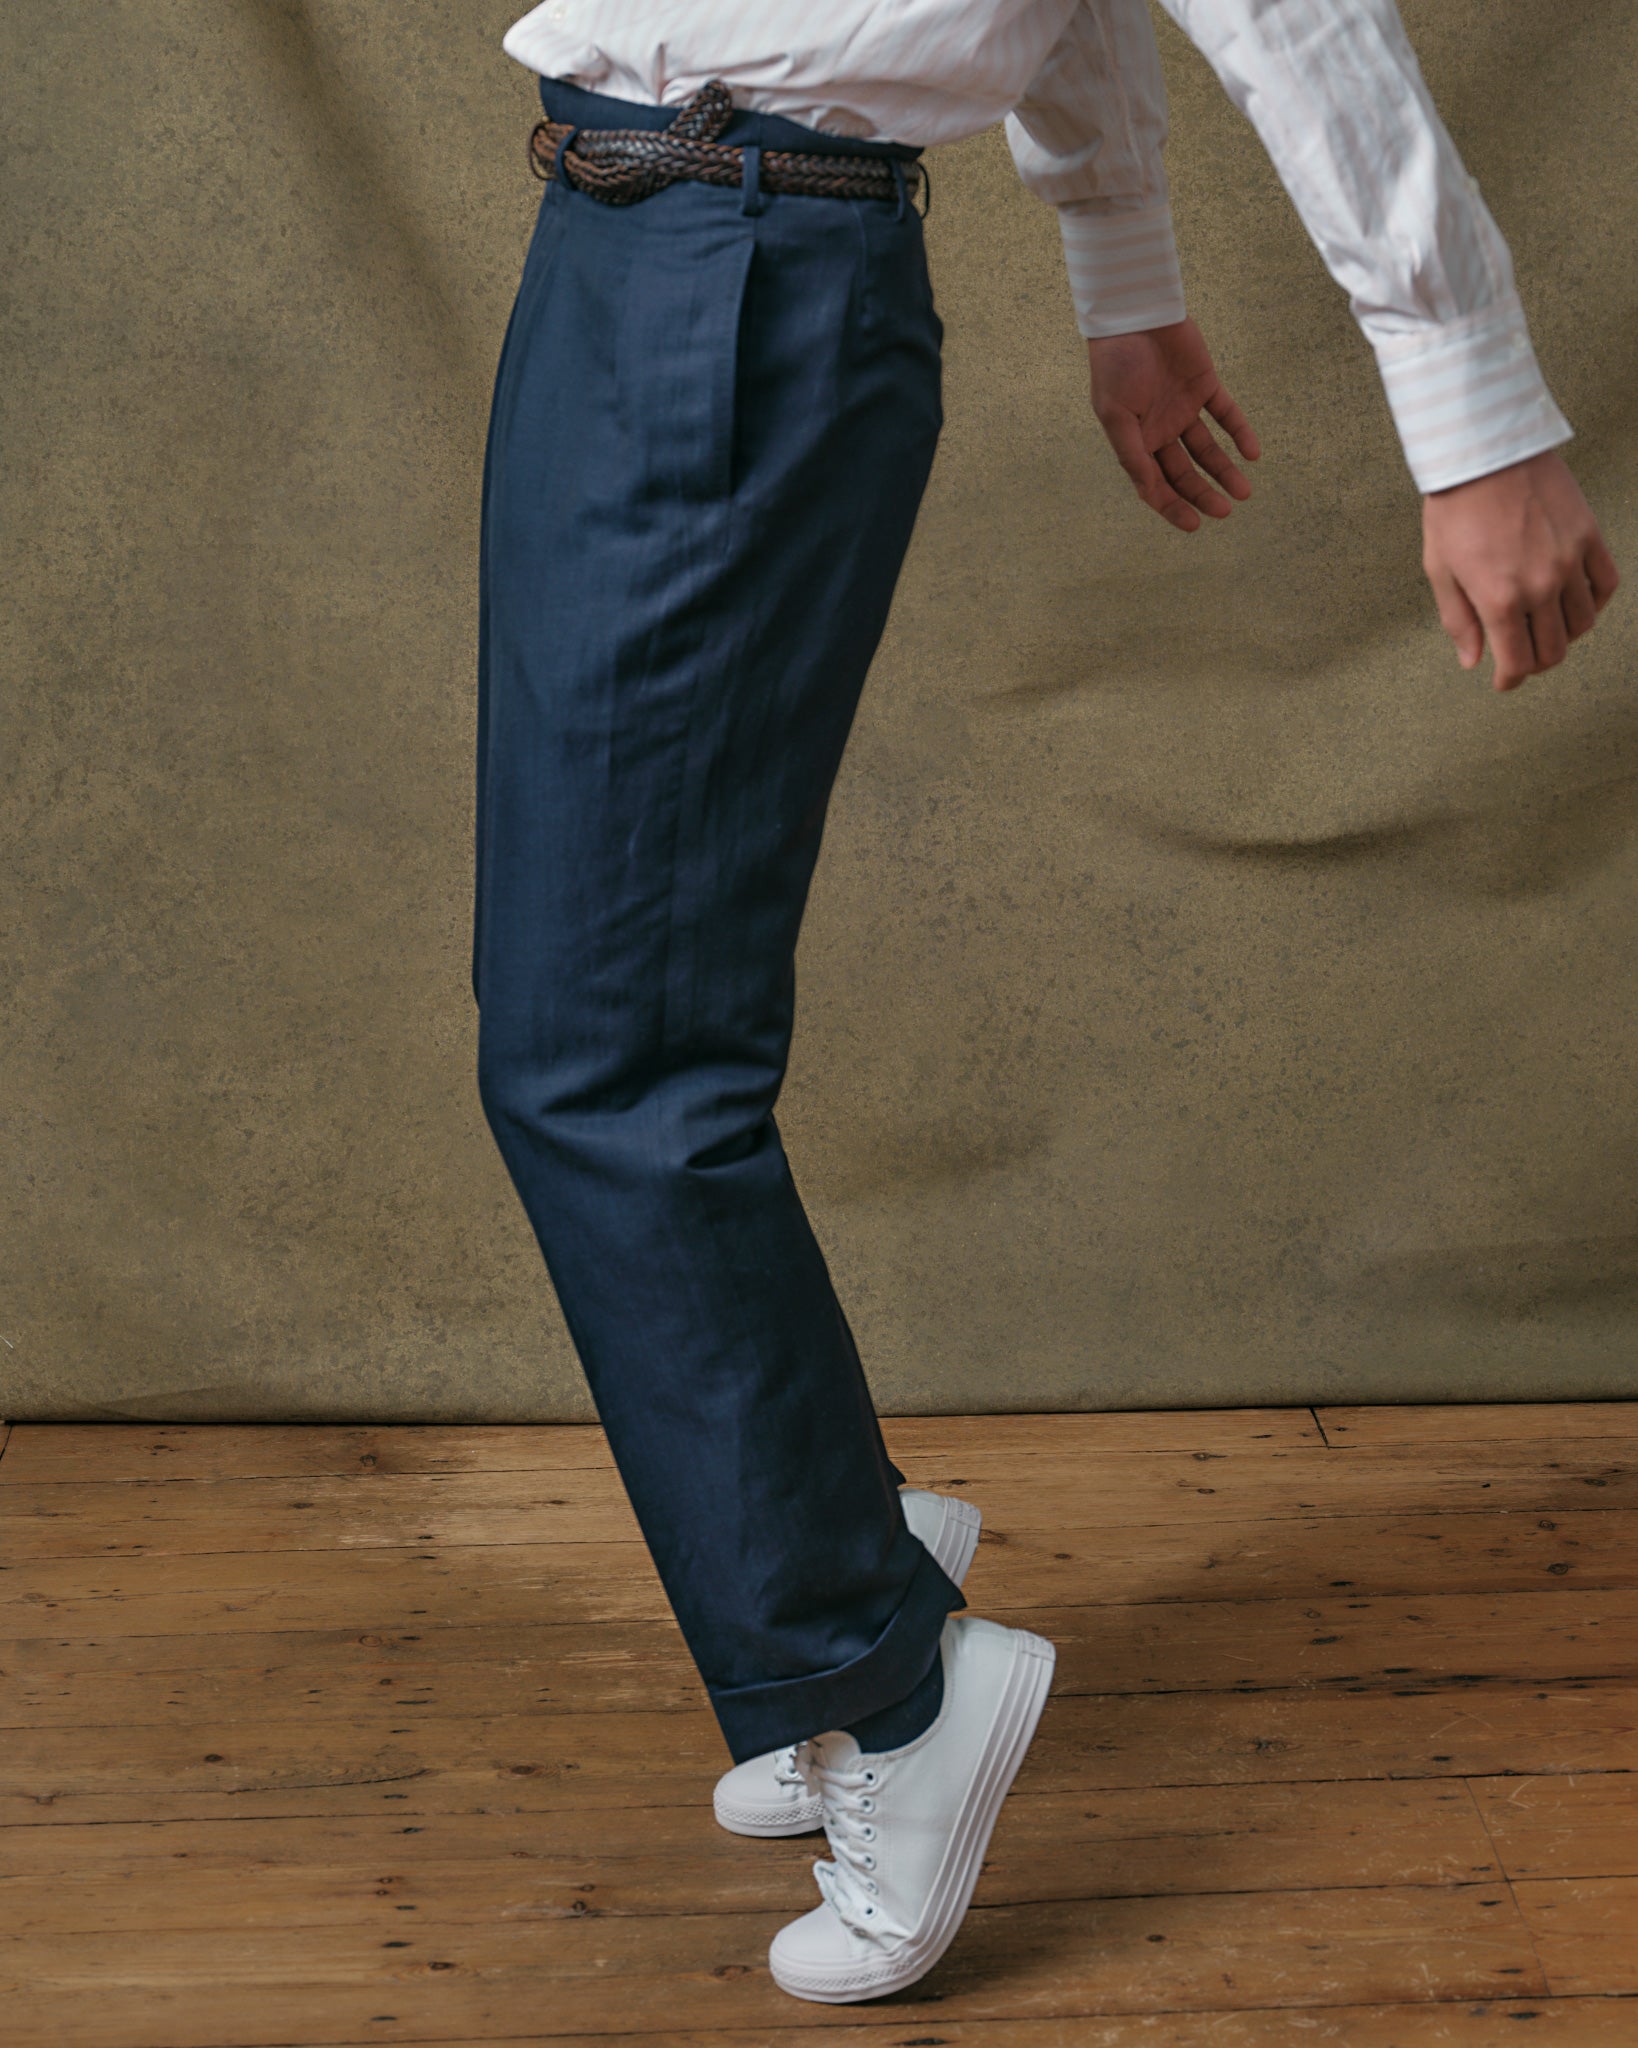 Hollywood Top Trousers in Natural Linen